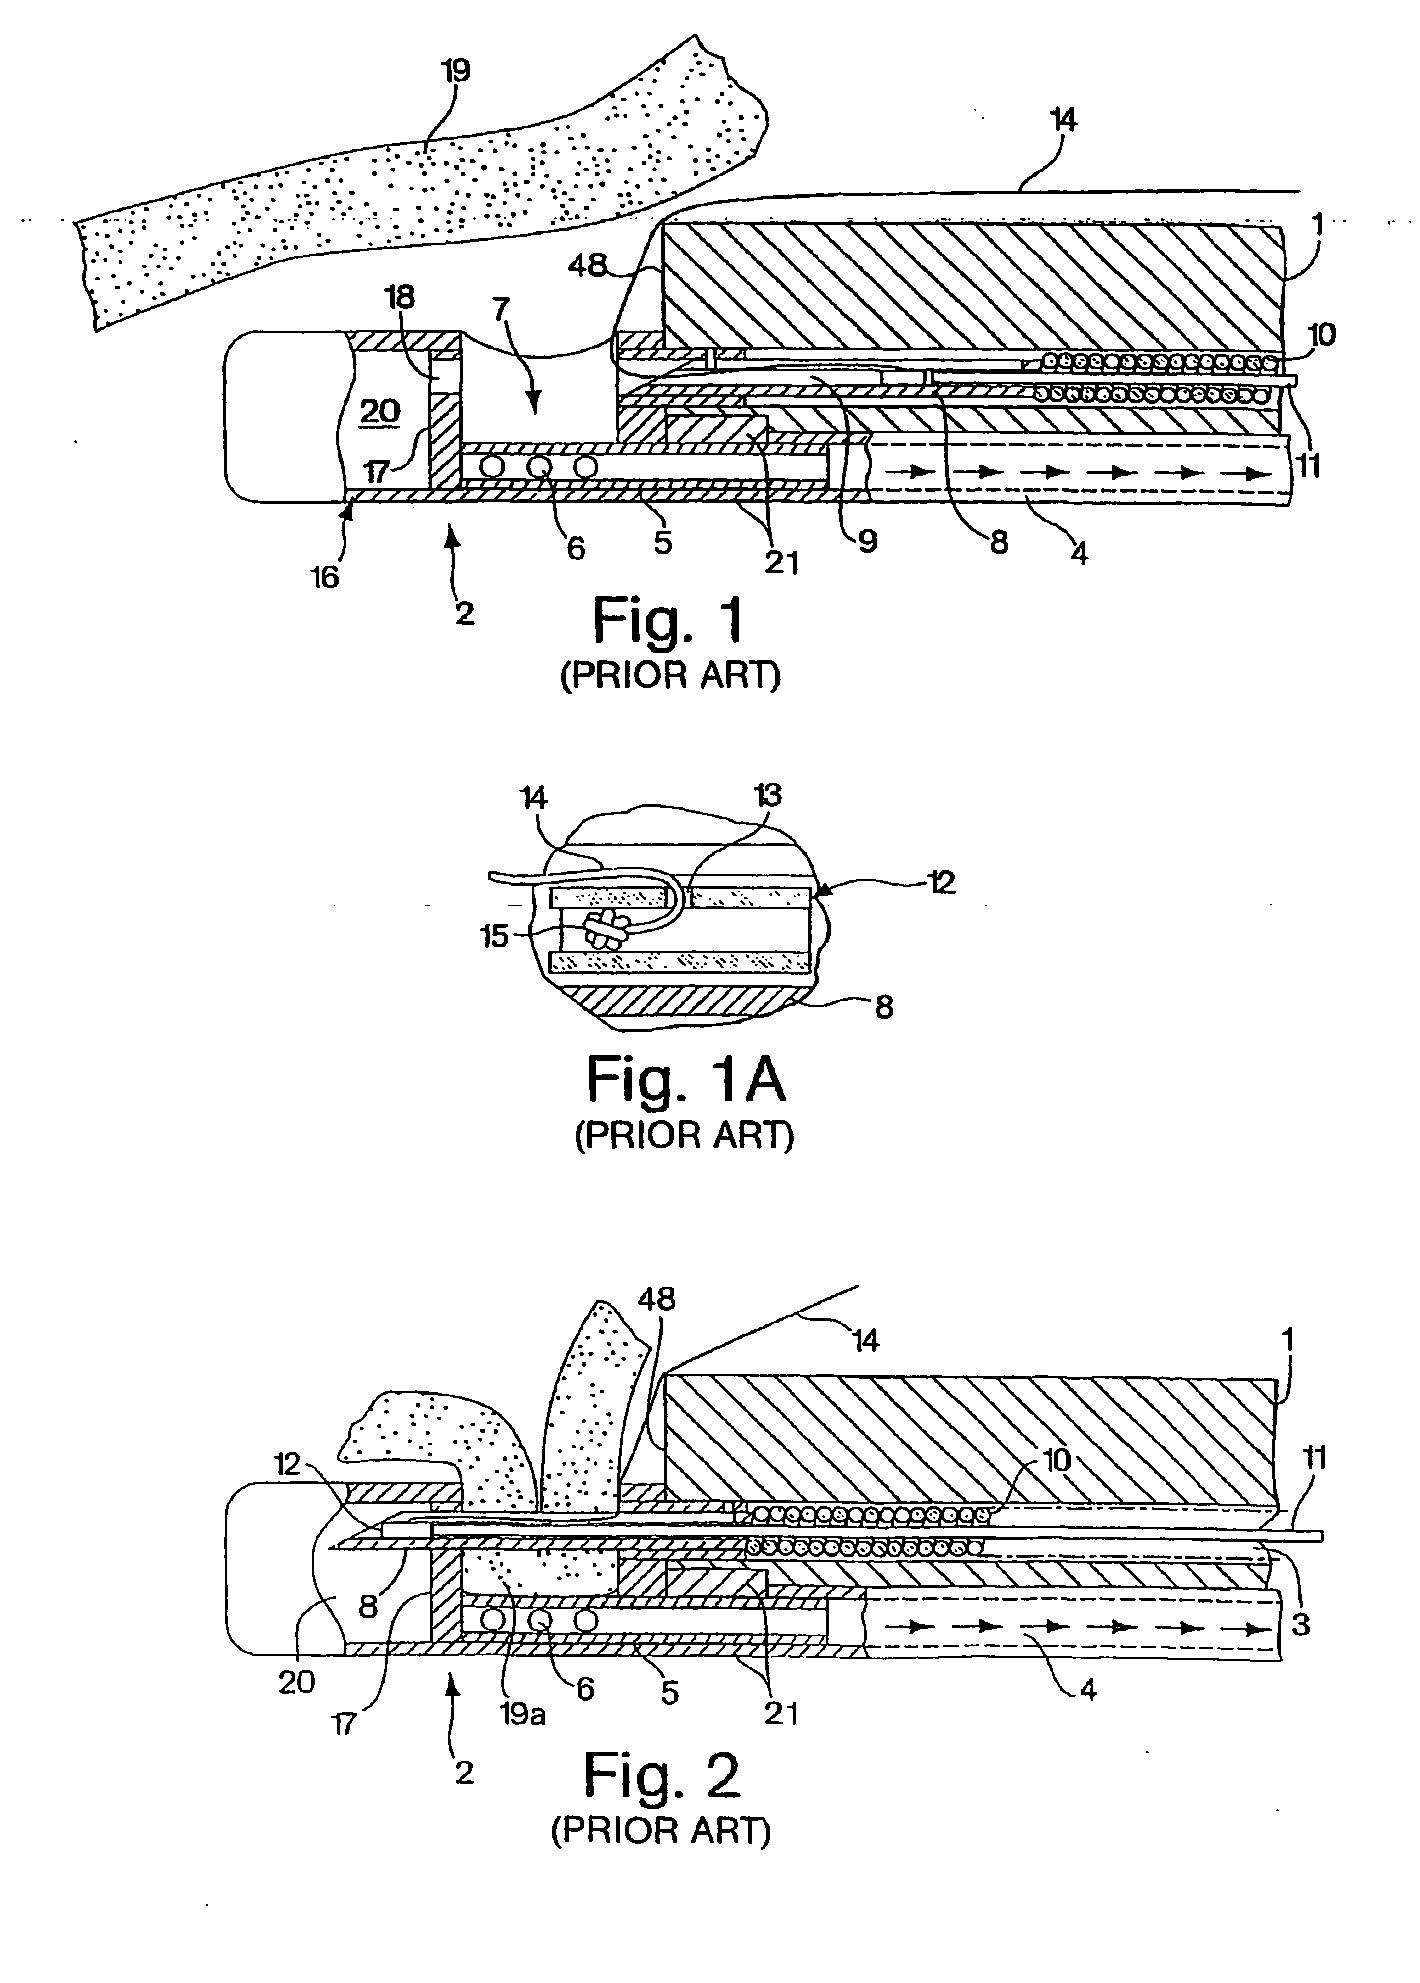 Endoscopic tissue apposition device and method of use